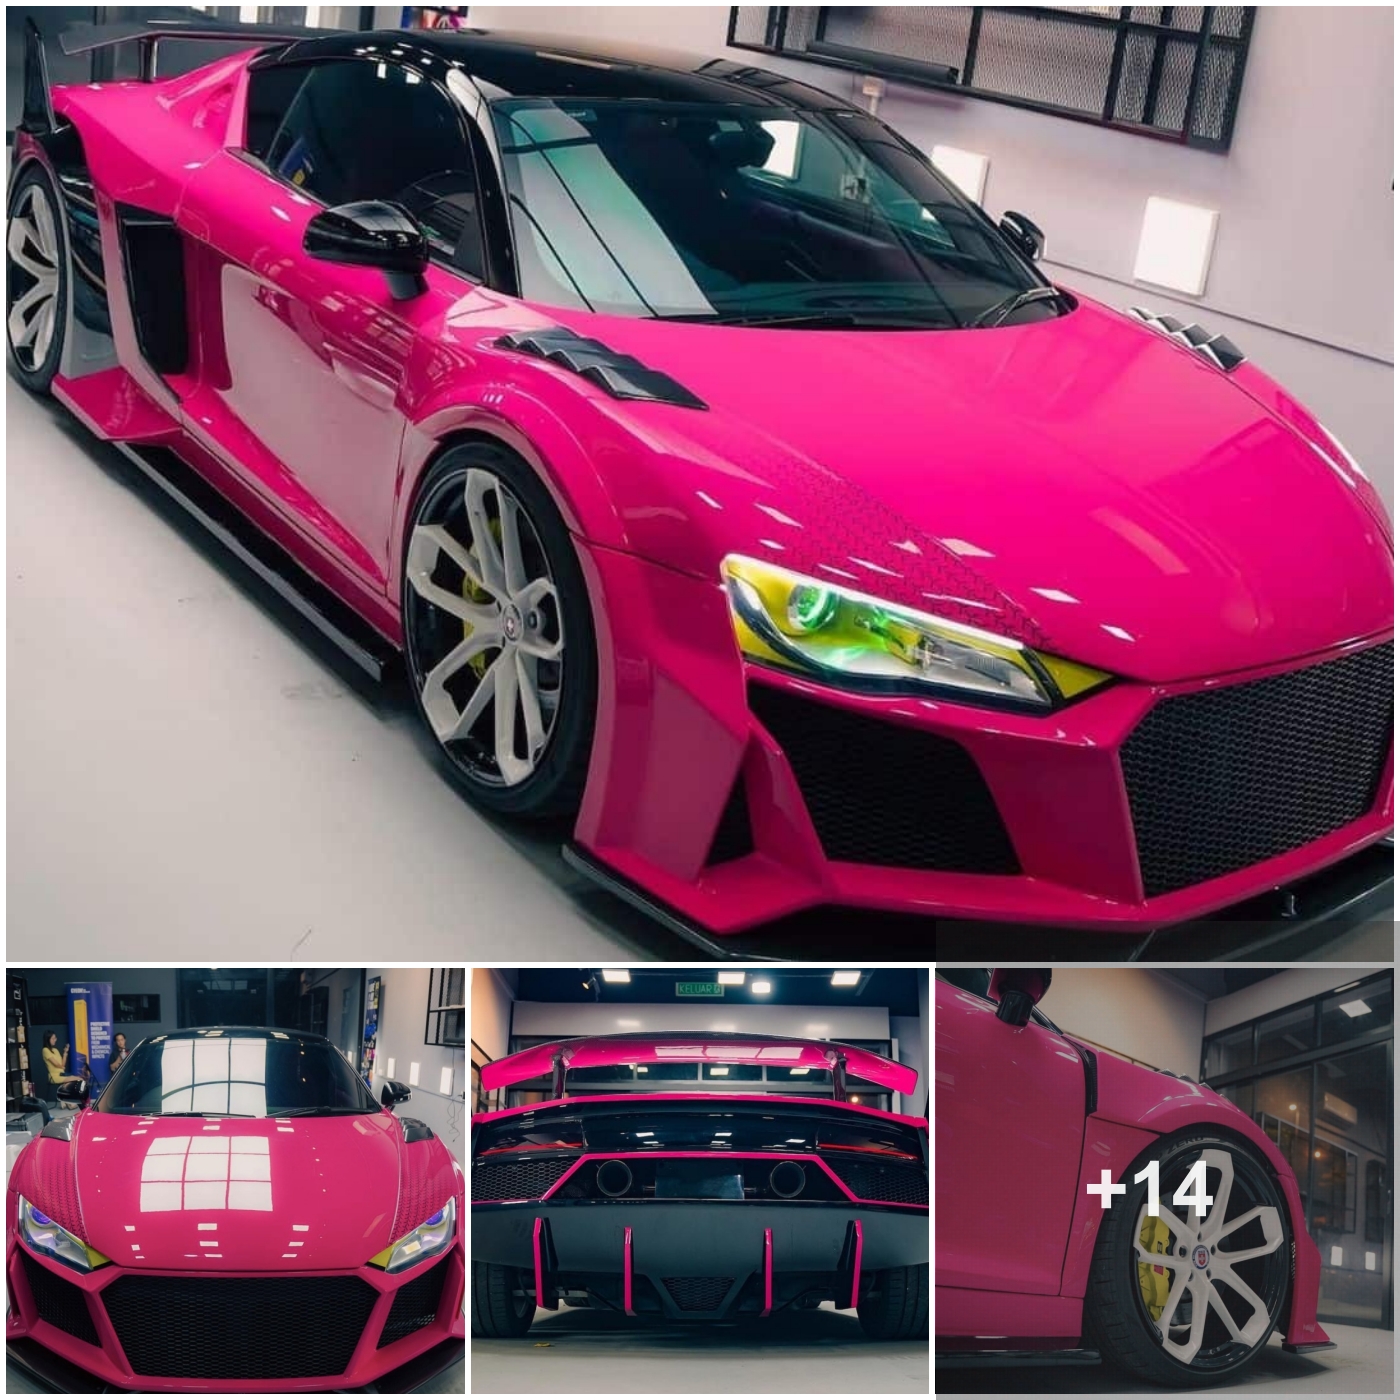 The Bold Elegance of the Pink Audi R8-007: Stand Out in Style